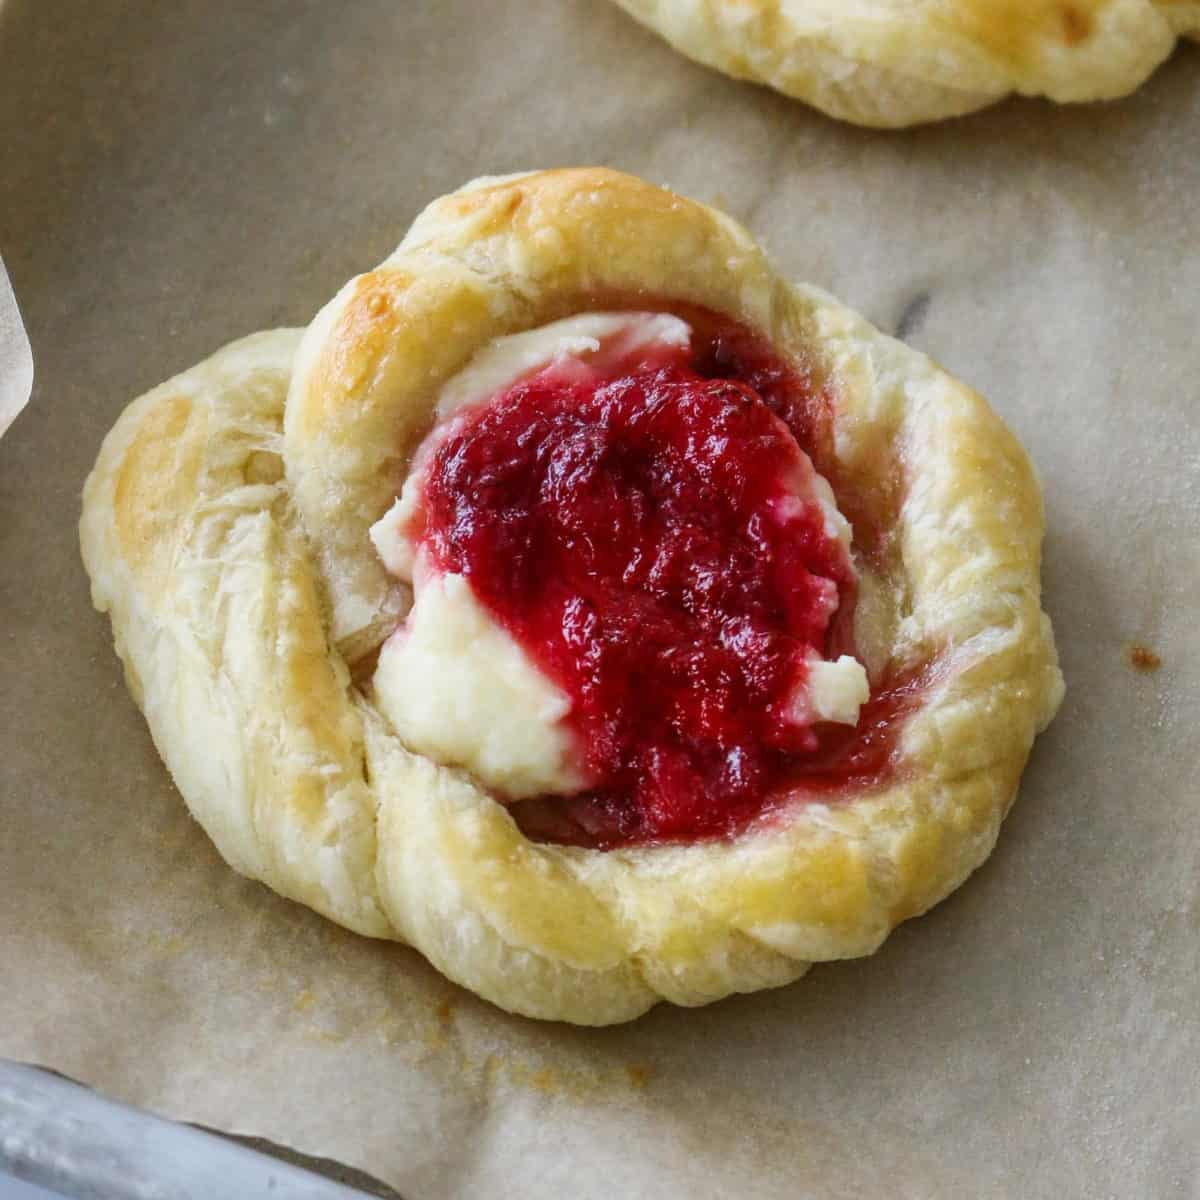 A close up of a strawberry Danish.